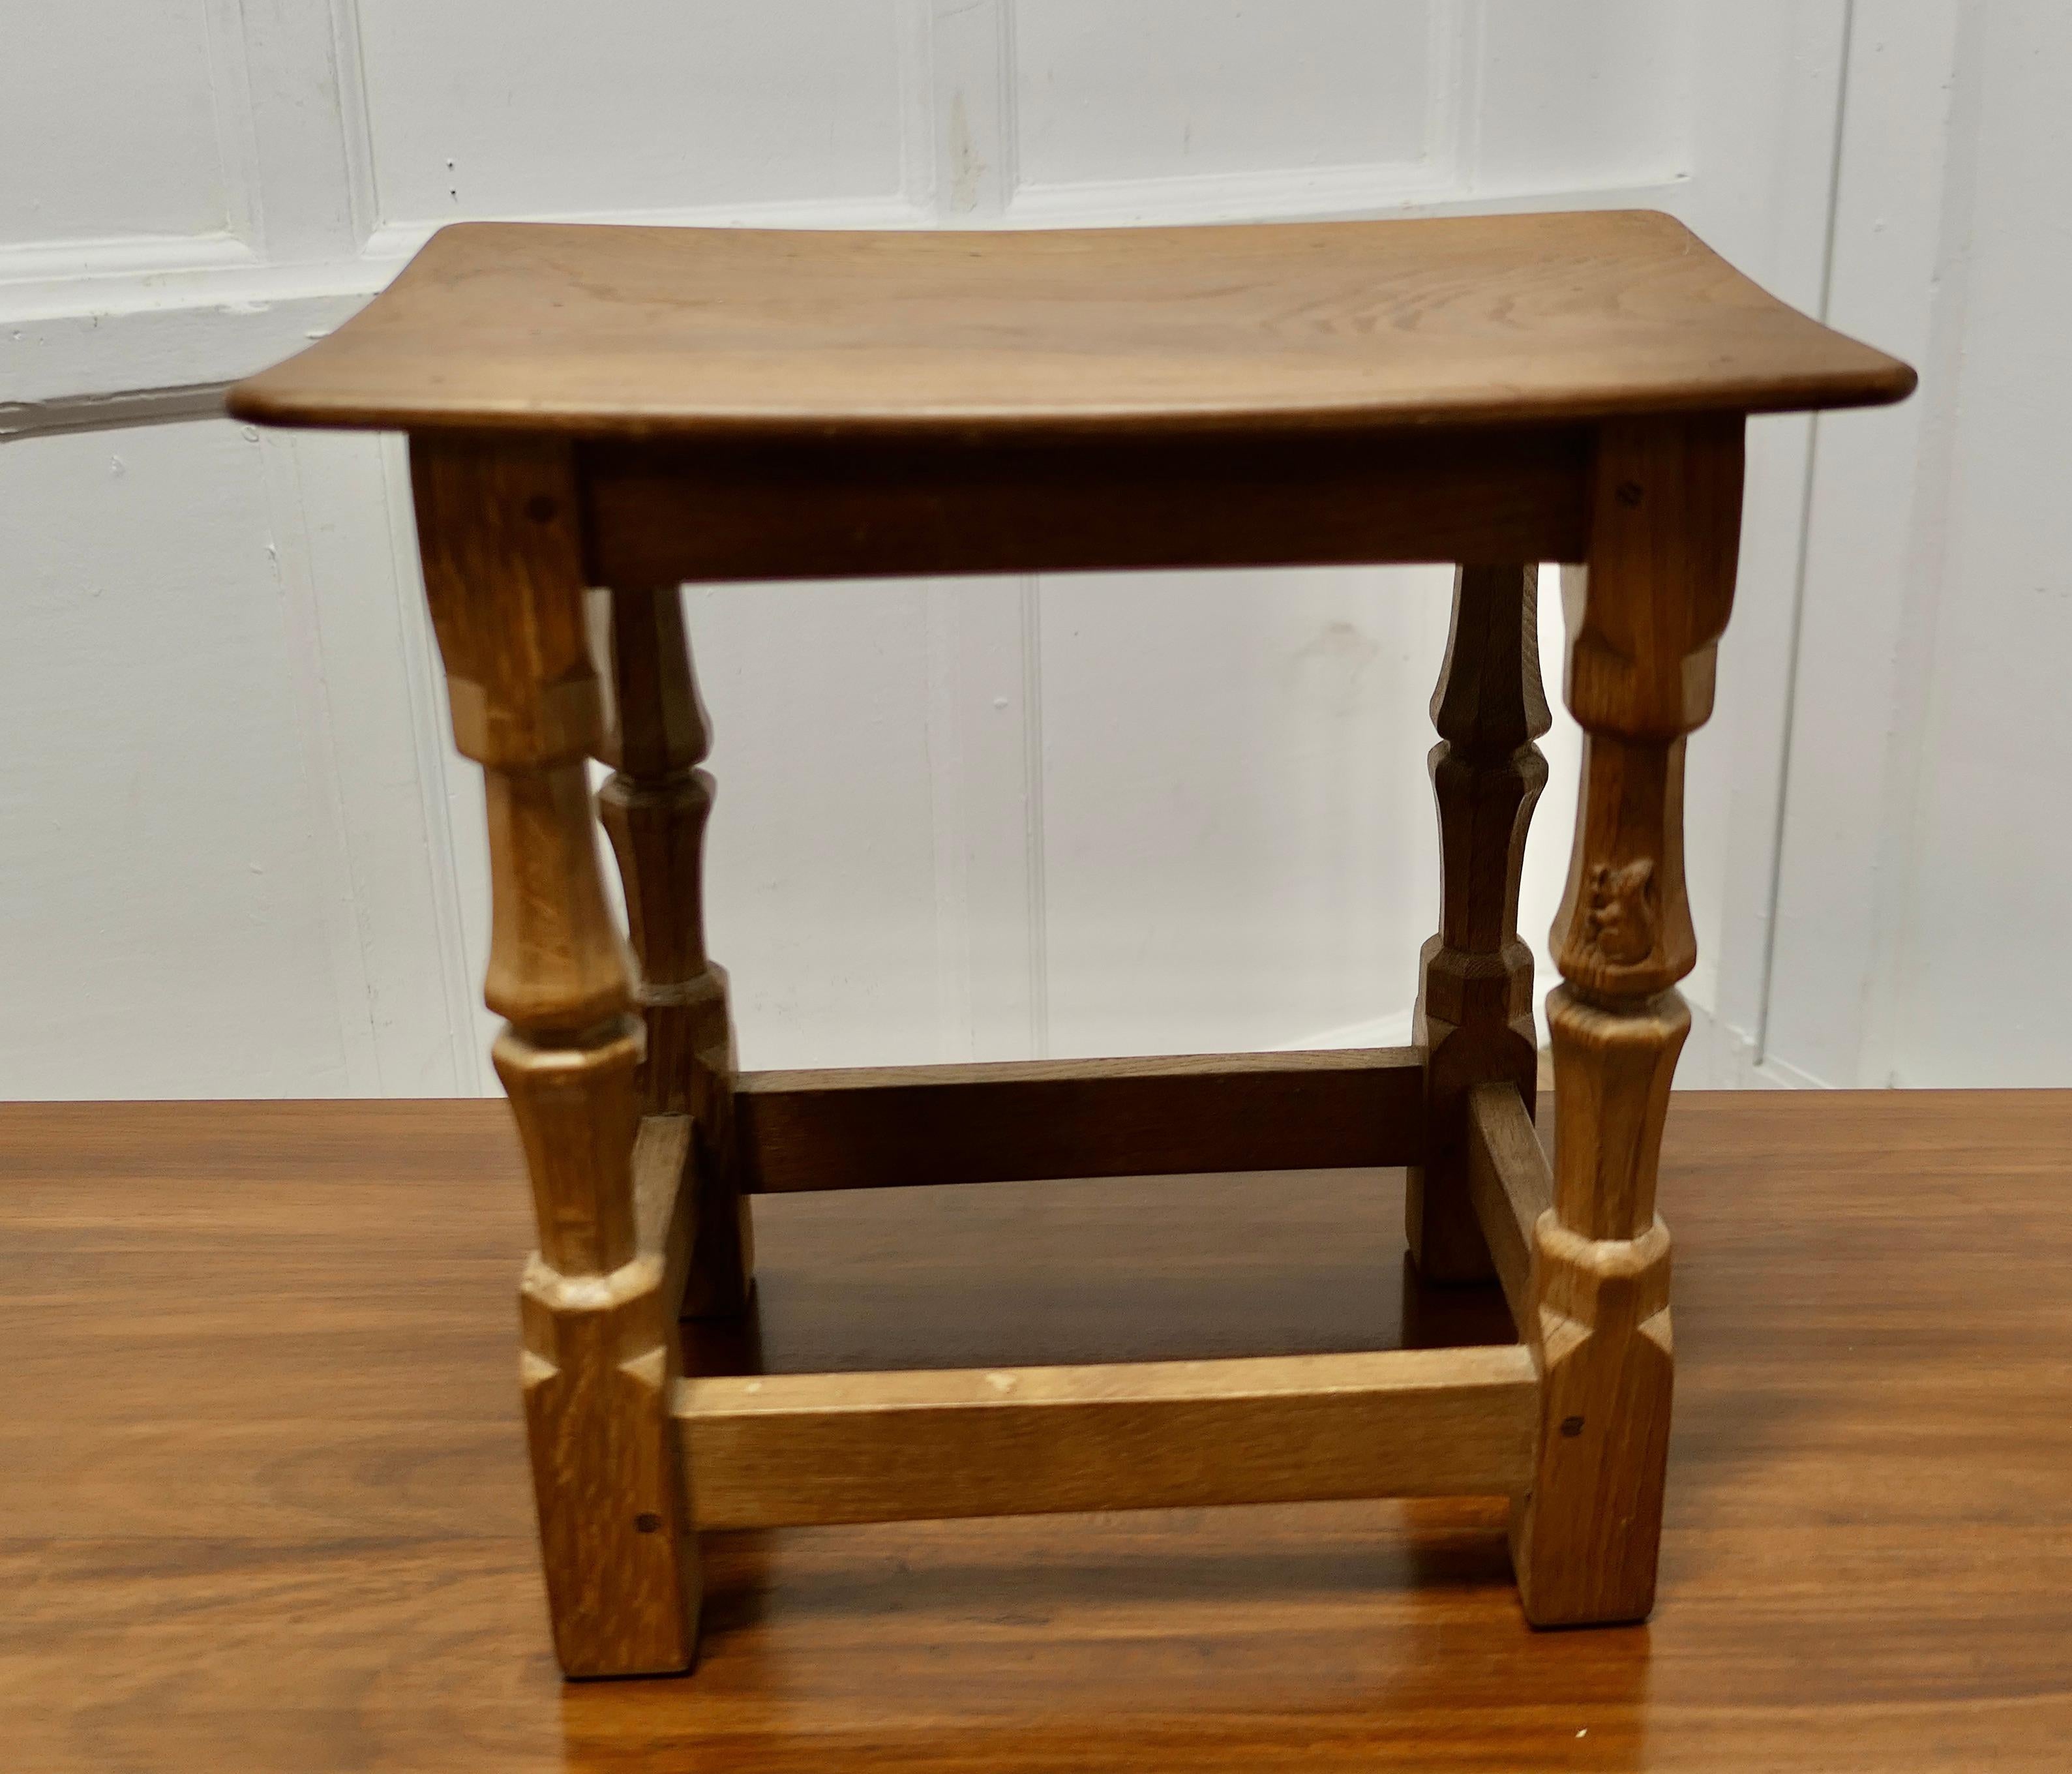 Squirrelman Oak Dish Top Adzed Stool by Wilf Hutchinson  
A Squirrelman Oak Joined Stool by Wilf Hutchinson with a raised prominent carved squirrel with a one piece adzed, shaped oak top set on four turned and octagonal shaped legs one with the